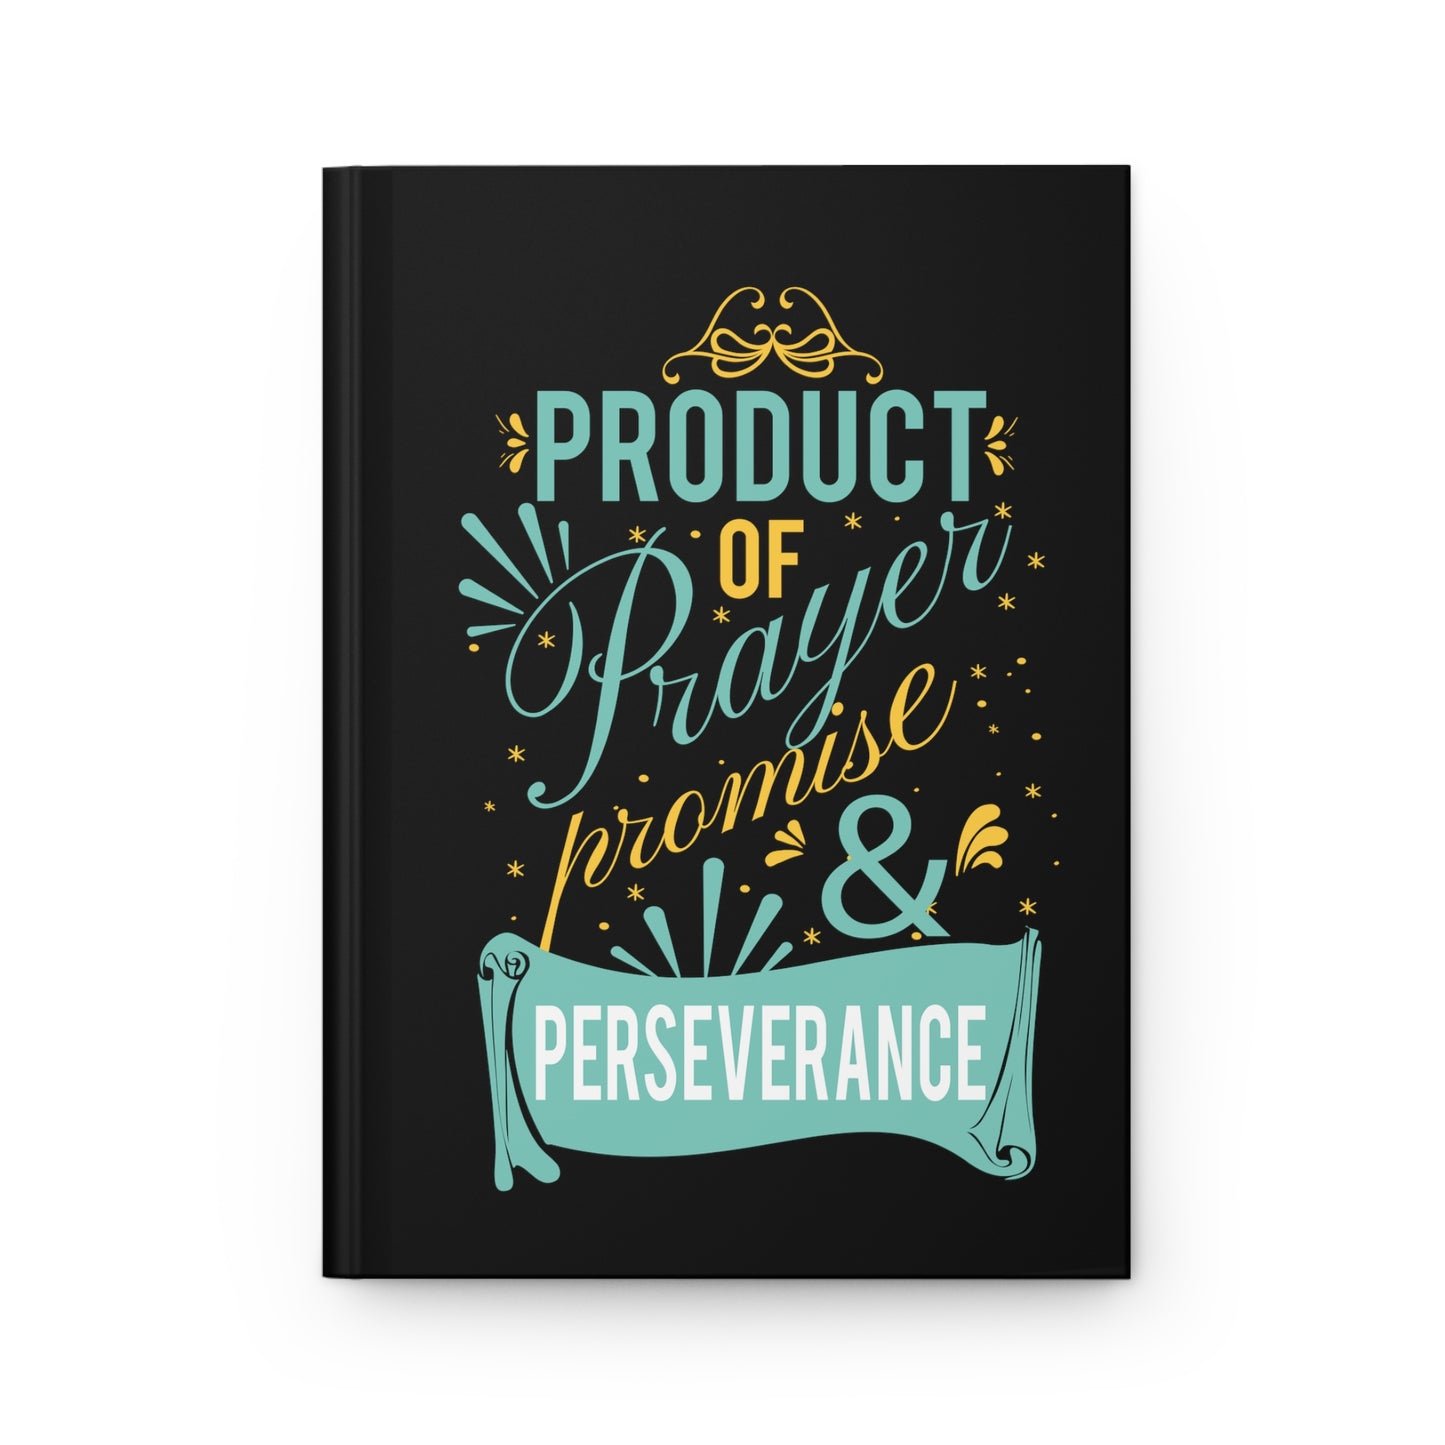 Product of Prayer, promise, and perseverance Hardcover Journal Matte